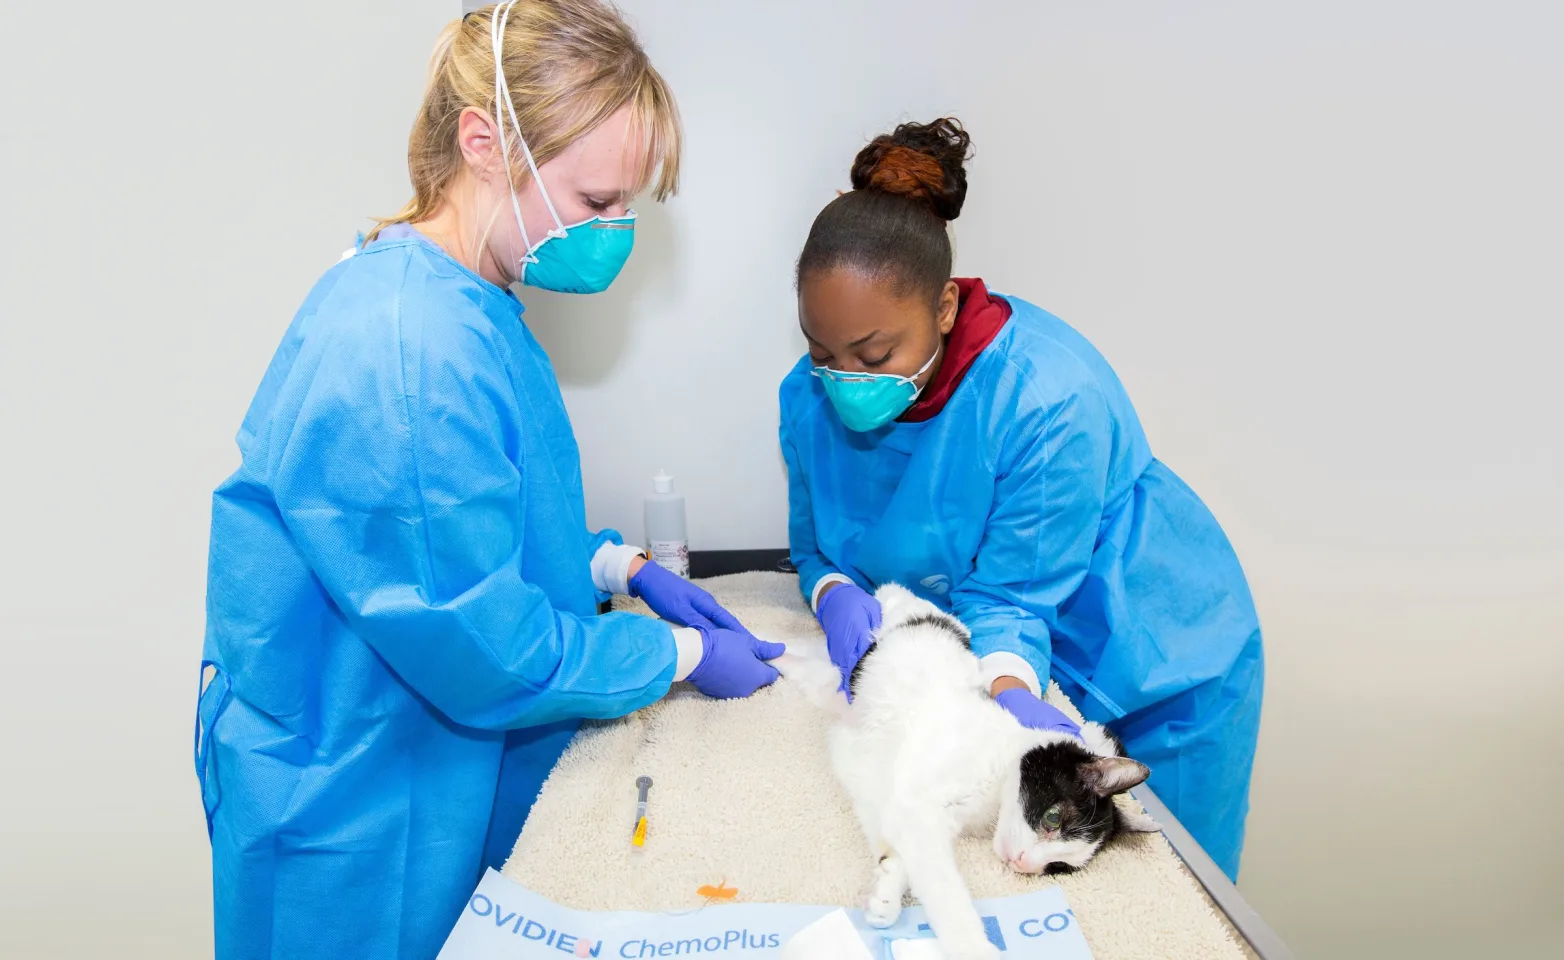 Oncology staff examining cat